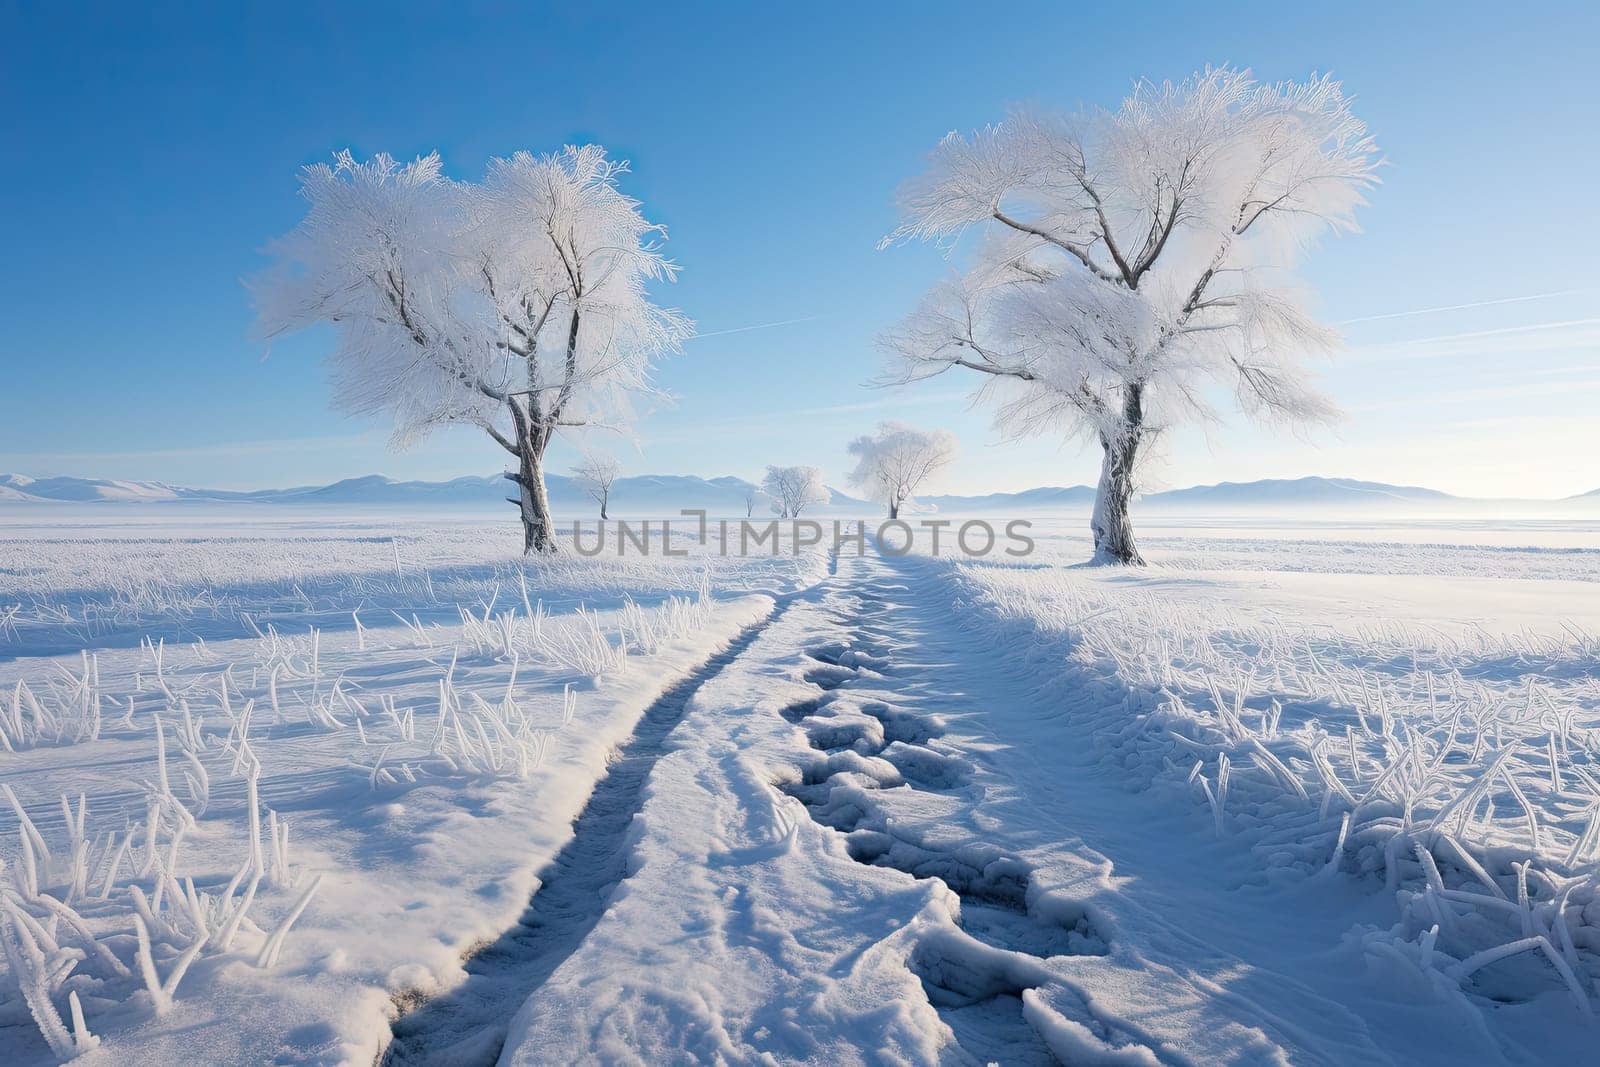 A Winter Wonderland: Serene Snowy Field with Majestic Trees in the Distance